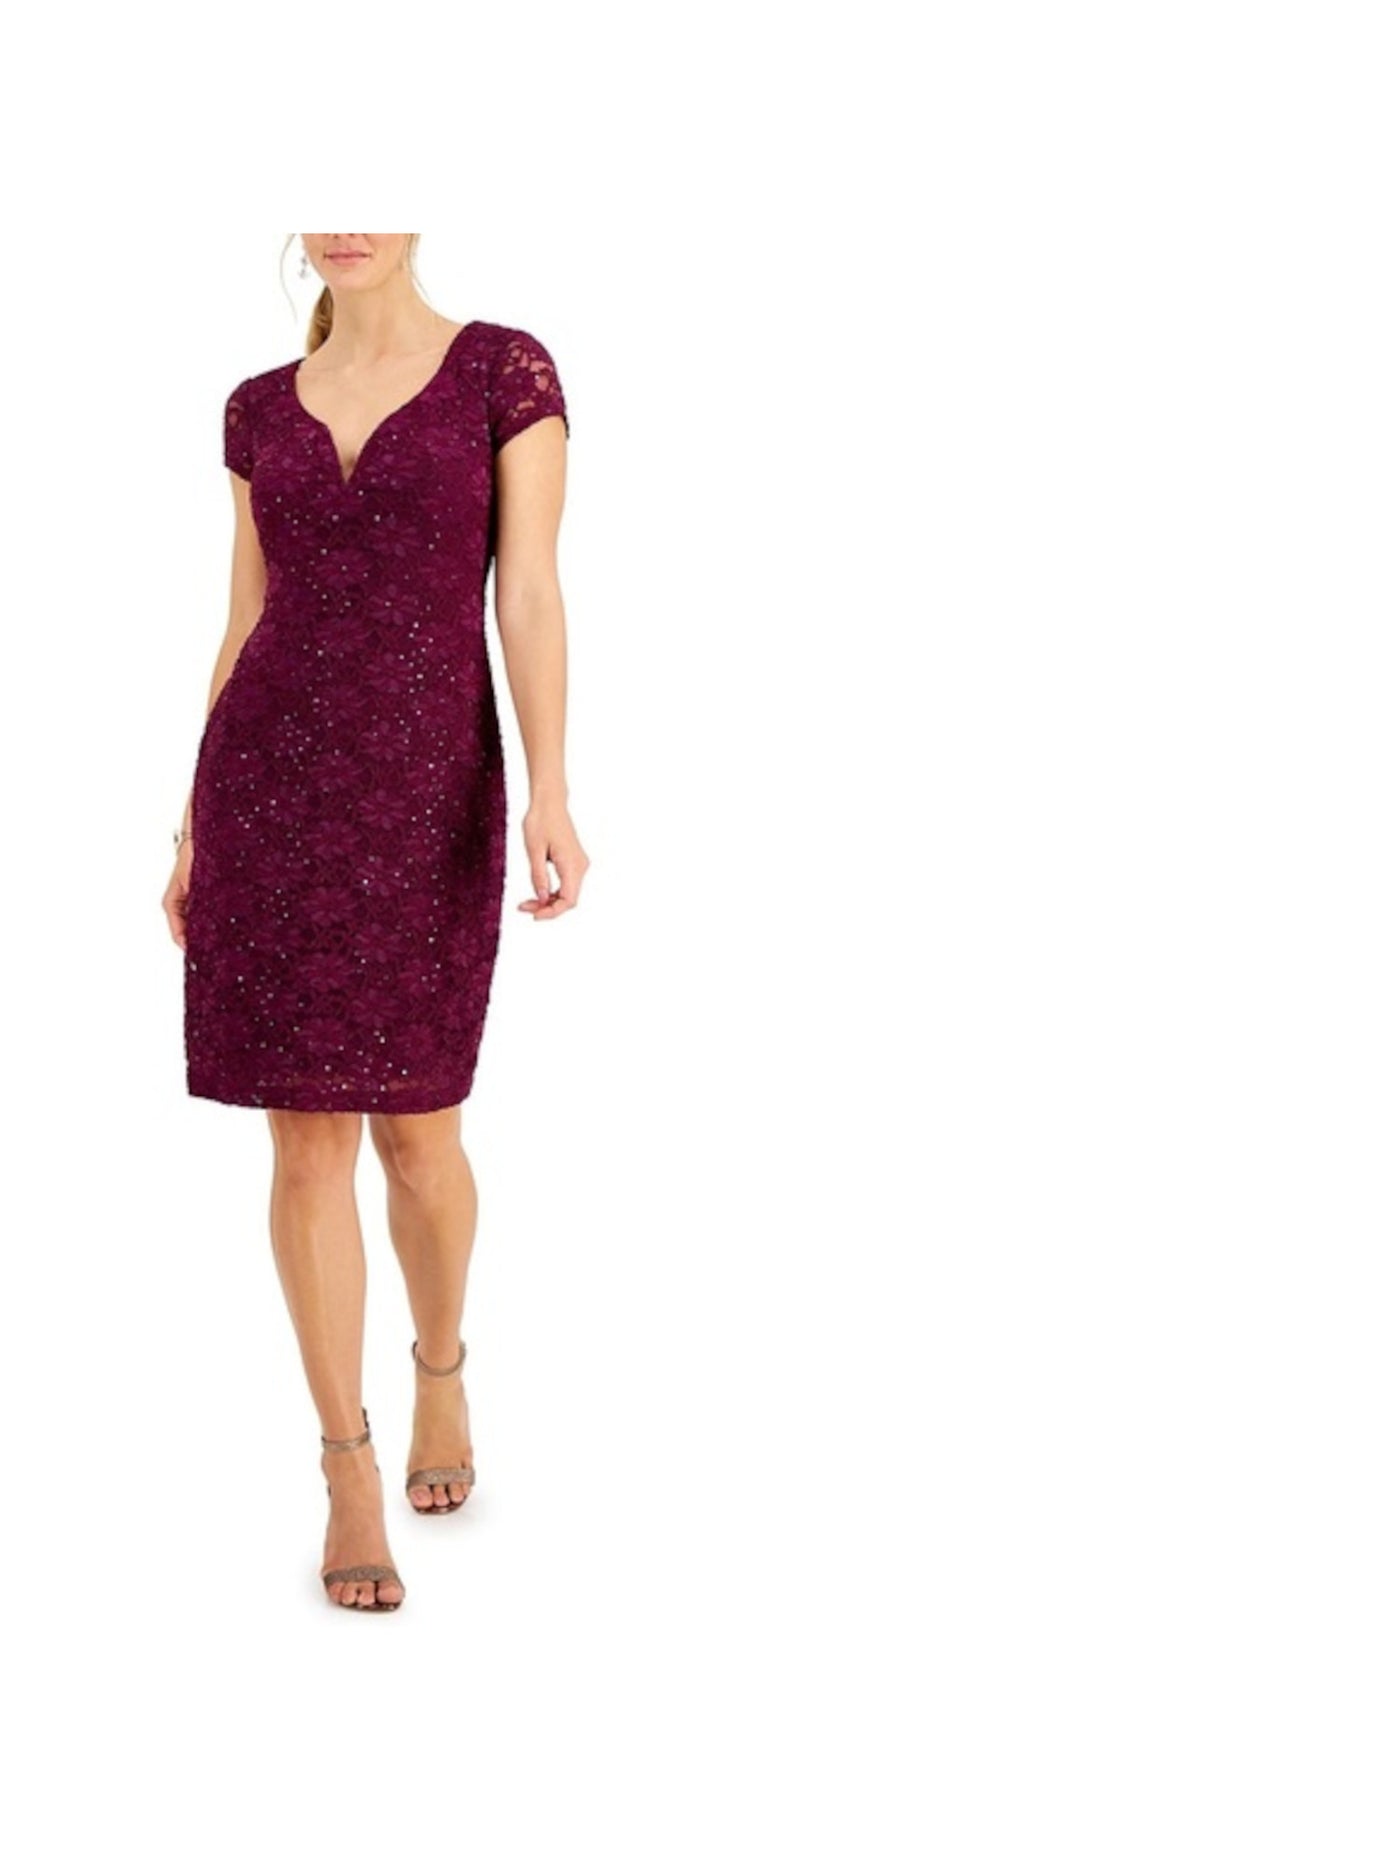 CONNECTED APPAREL Womens Burgundy Sequined Lace Zippered Floral Cap Sleeve Sweetheart Neckline Above The Knee Evening Body Con Dress 14